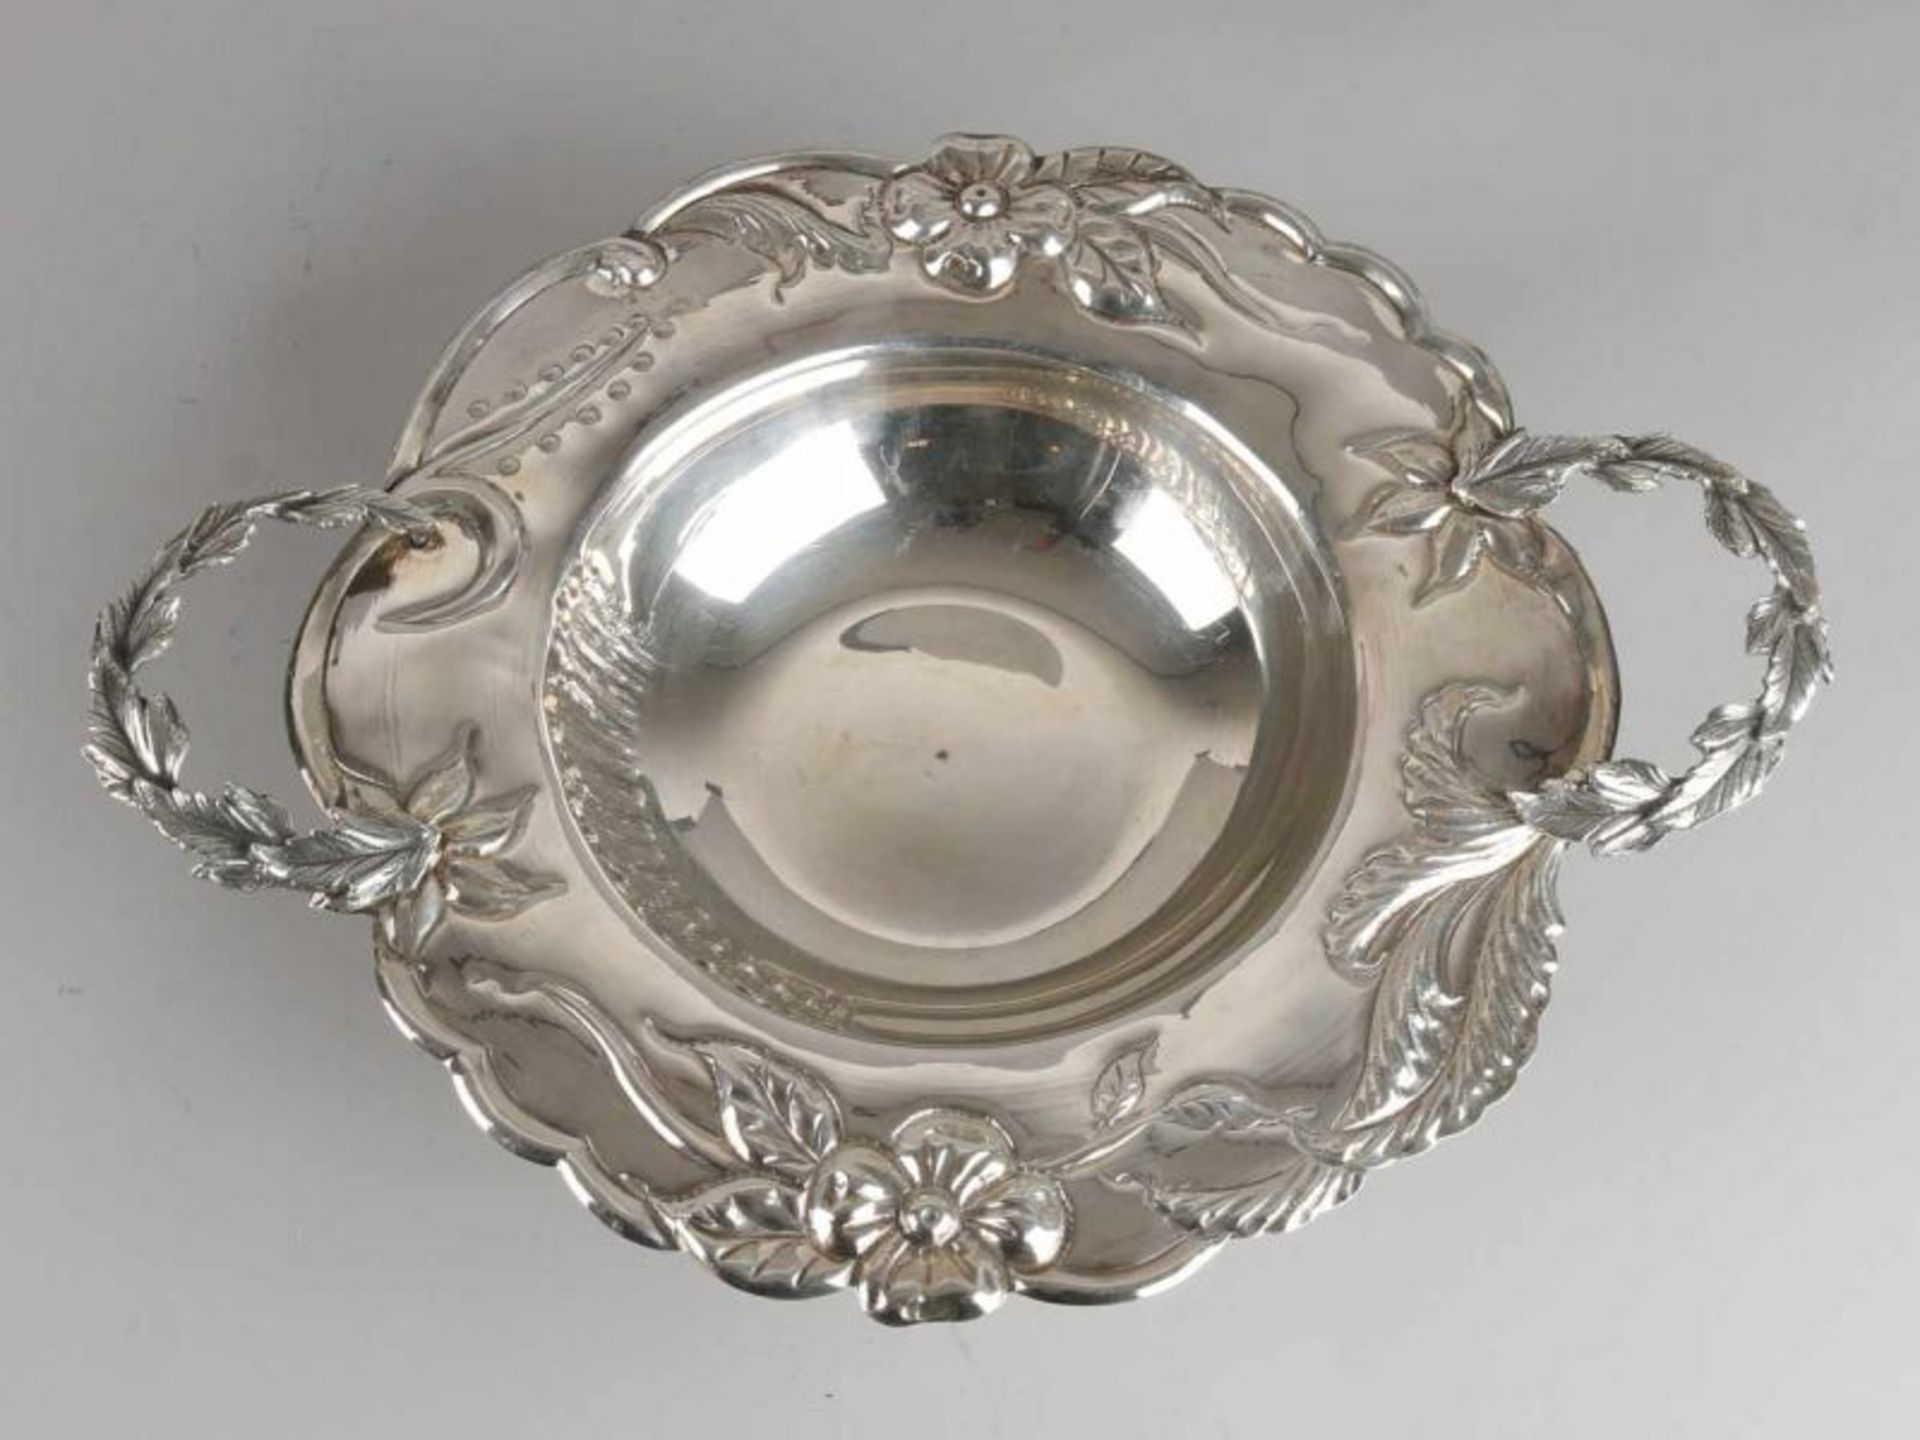 Fine silver platter, 835/000, round model with a molded edge with floral decoration, set on a - Image 2 of 2